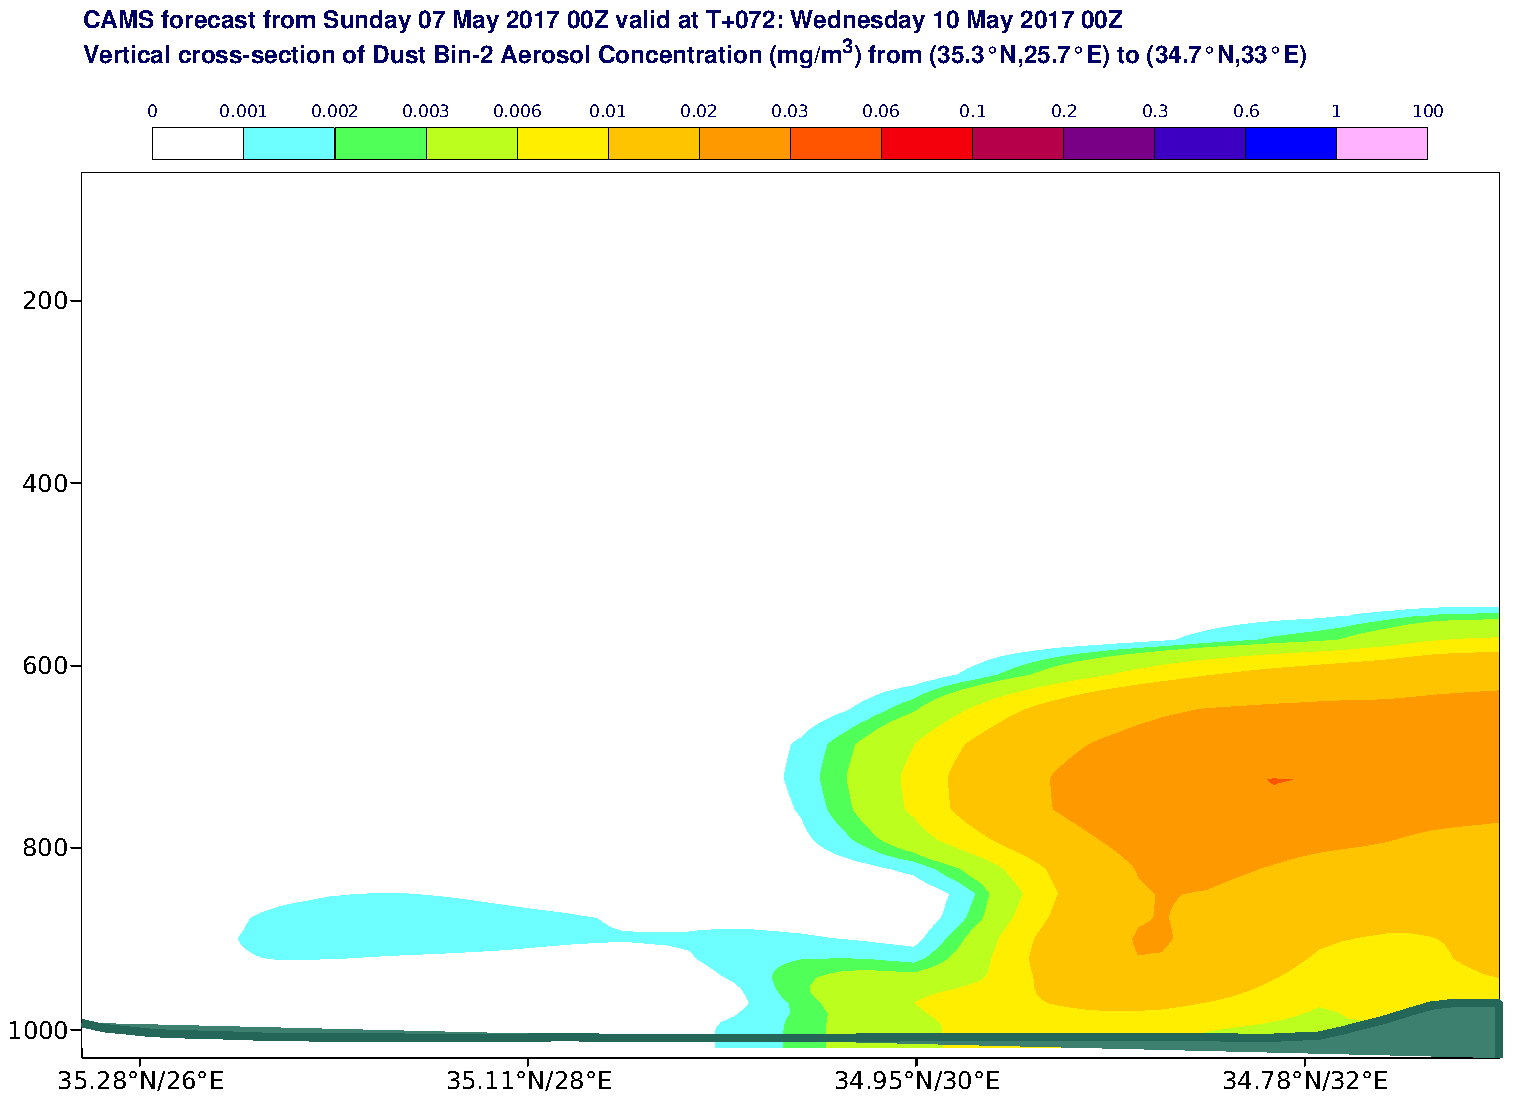 Vertical cross-section of Dust Bin-2 Aerosol Concentration (mg/m3) valid at T72 - 2017-05-10 00:00